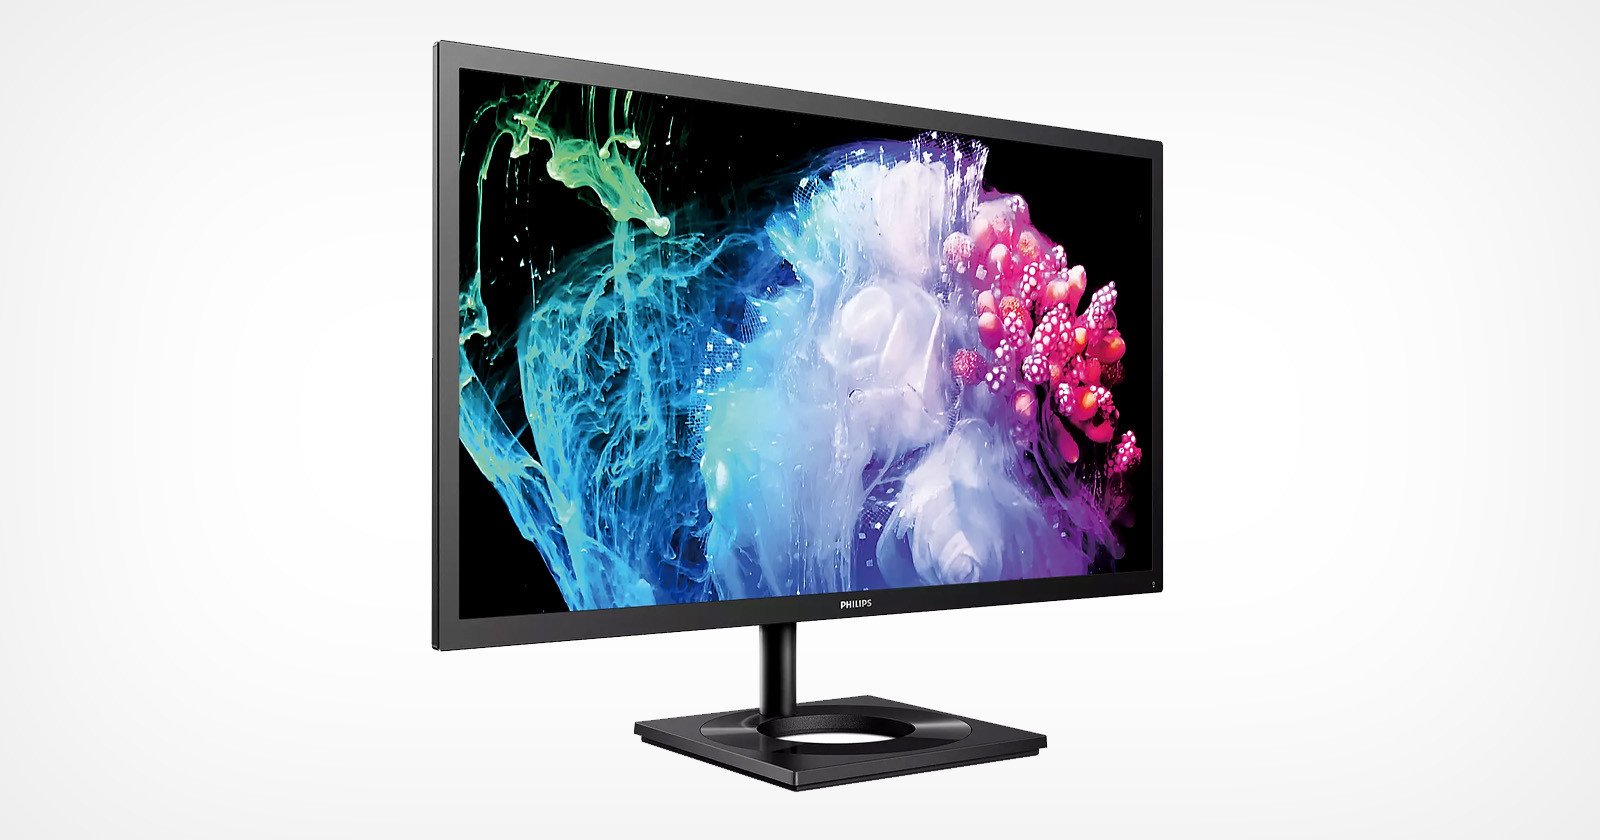  philips momentum 8000 super color-accurate oled monitor 